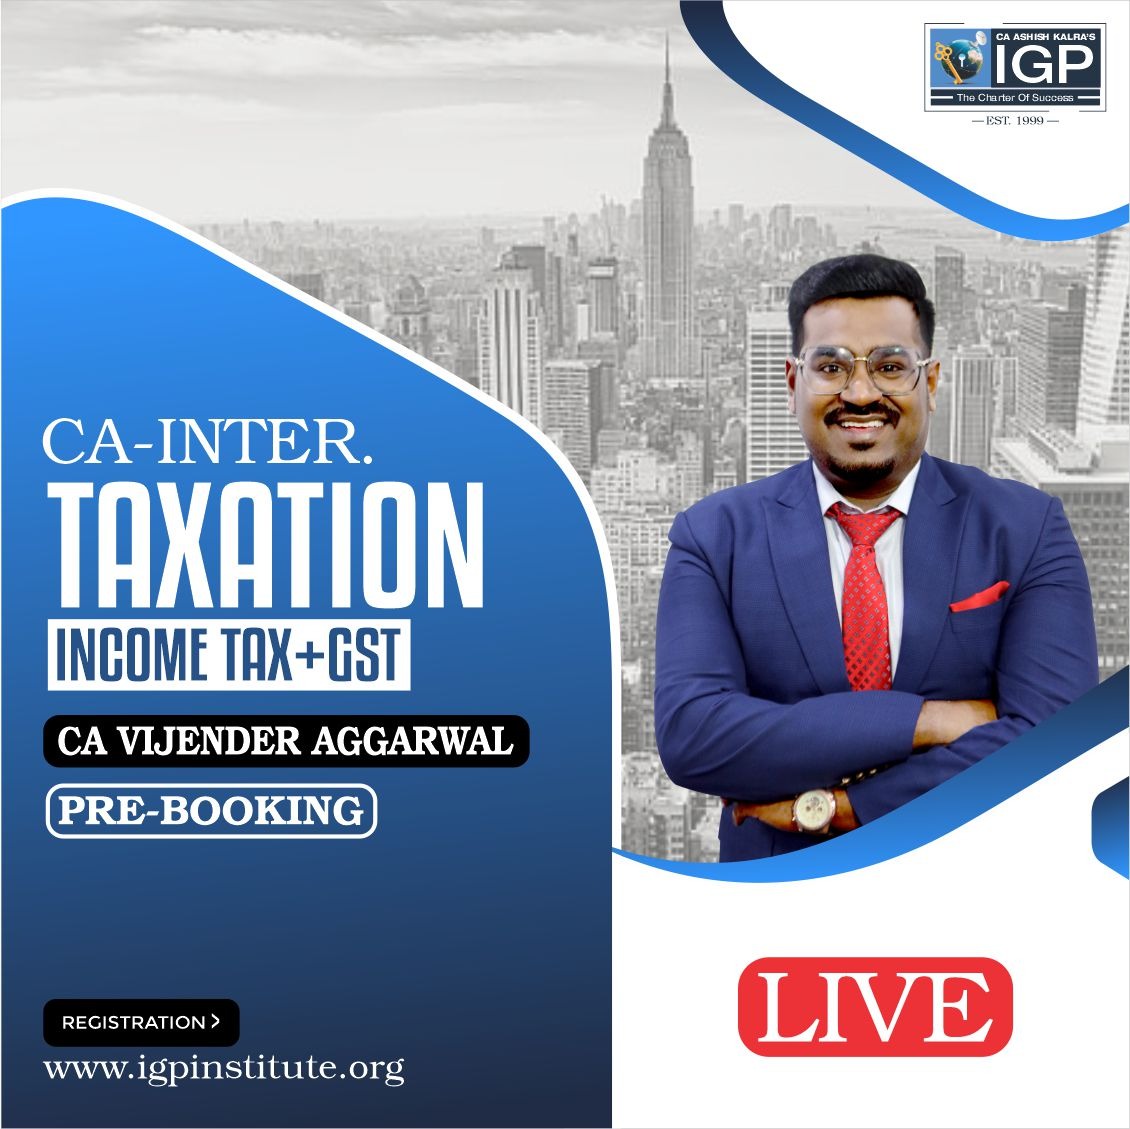 CA Inter - Taxation (Income Tax + GST) Face to Face/Live Pre-Booking-CA-INTER-Taxation (Income Tax + GST)- CA Vijender Aggarwal